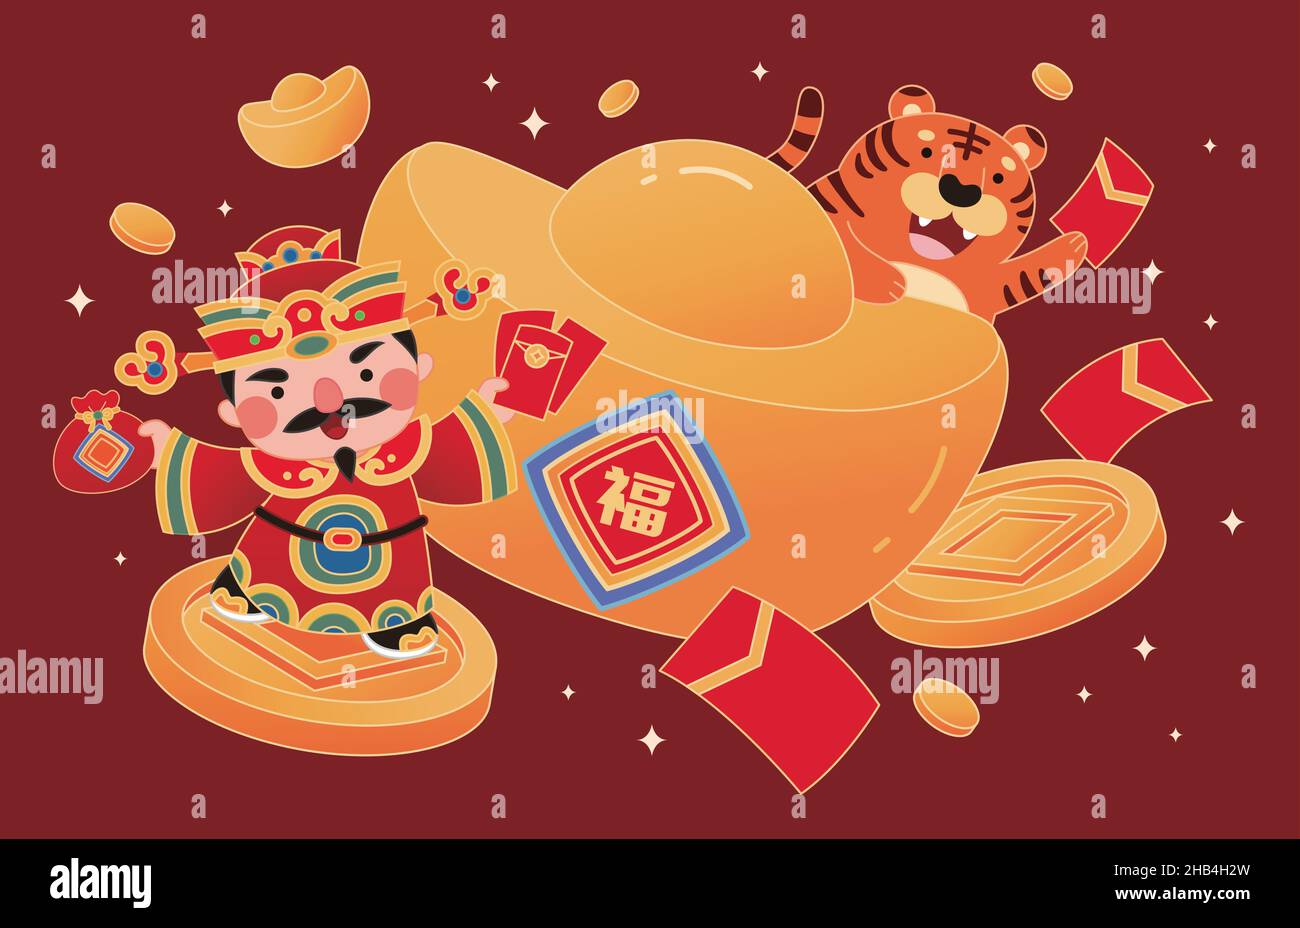 Chinese new year poster design with god of wealth, tiger, gold ingots. Flat illustration. Stock Vector